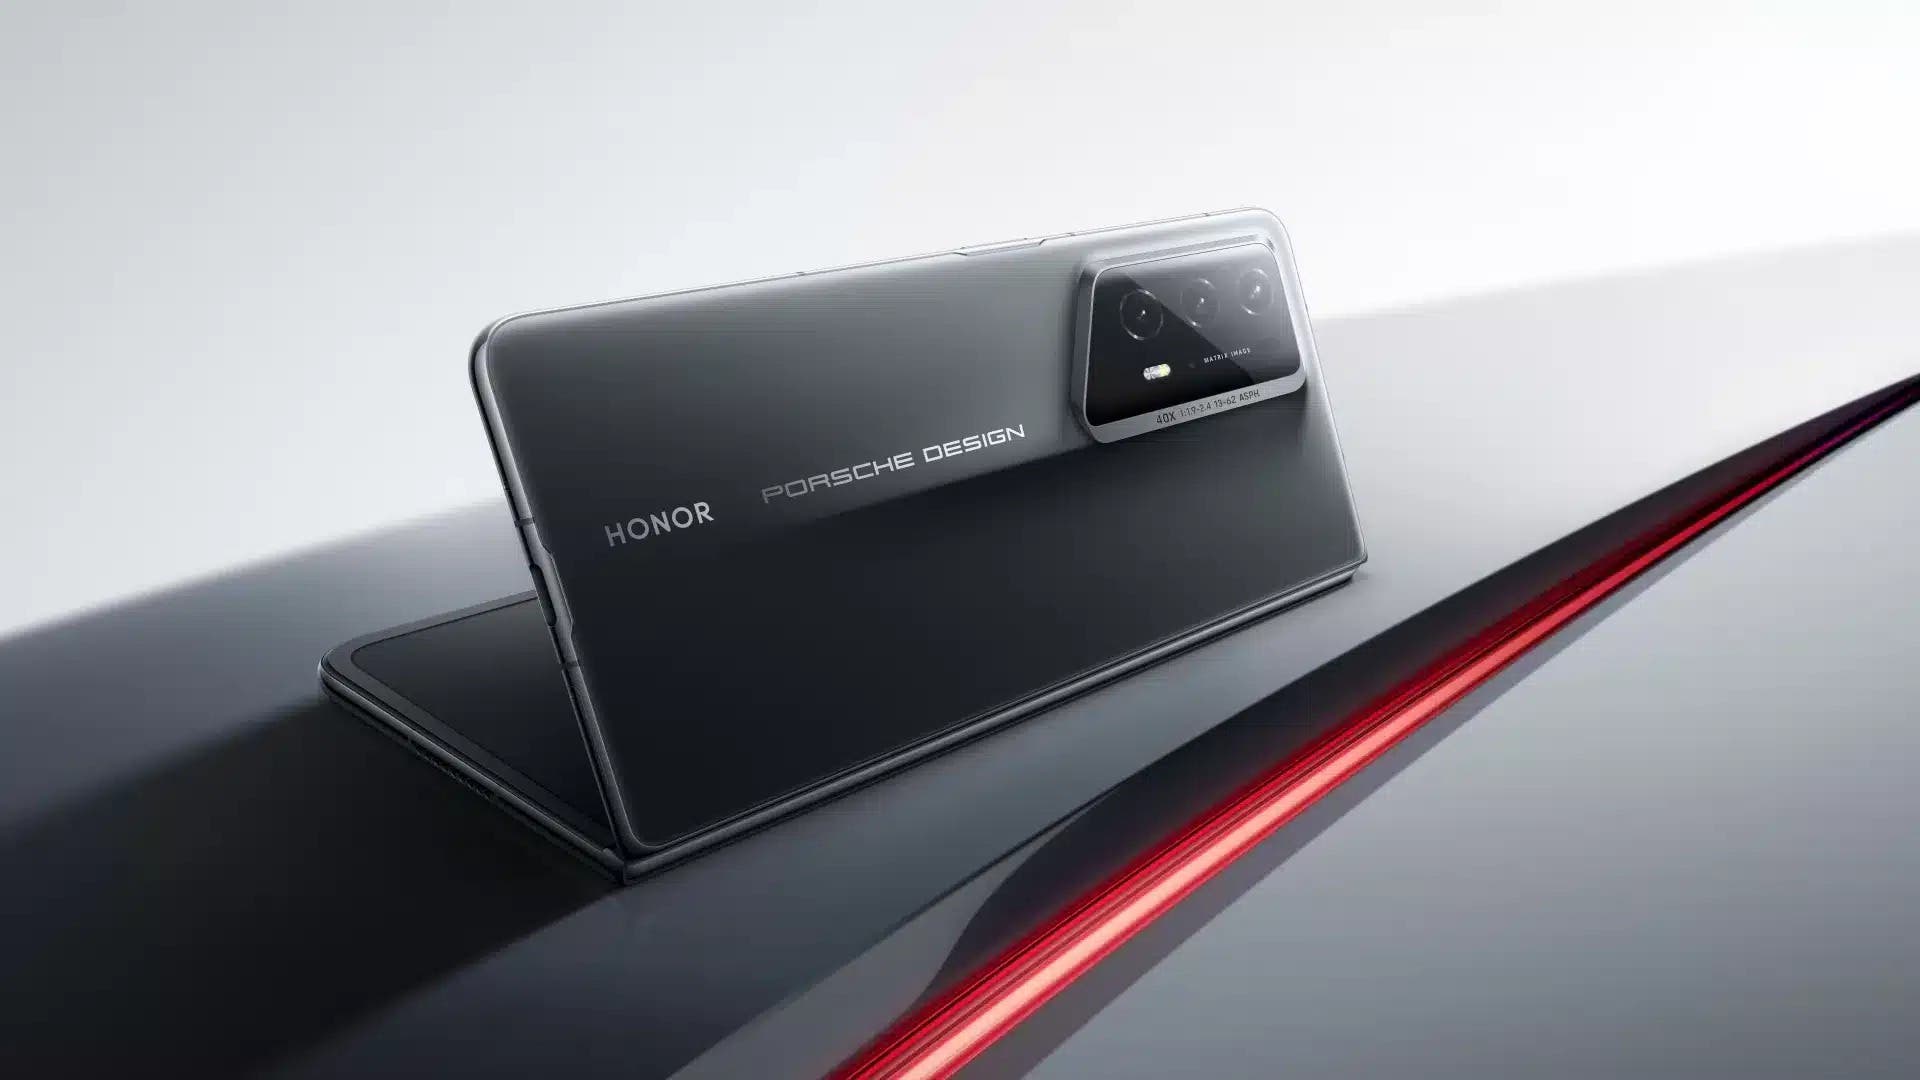 Honor Magic V2 RSR Porsche Design's premium foldable smartphone goes on sale in Europe for €2700 - €700 more expensive than the regular Magic V2